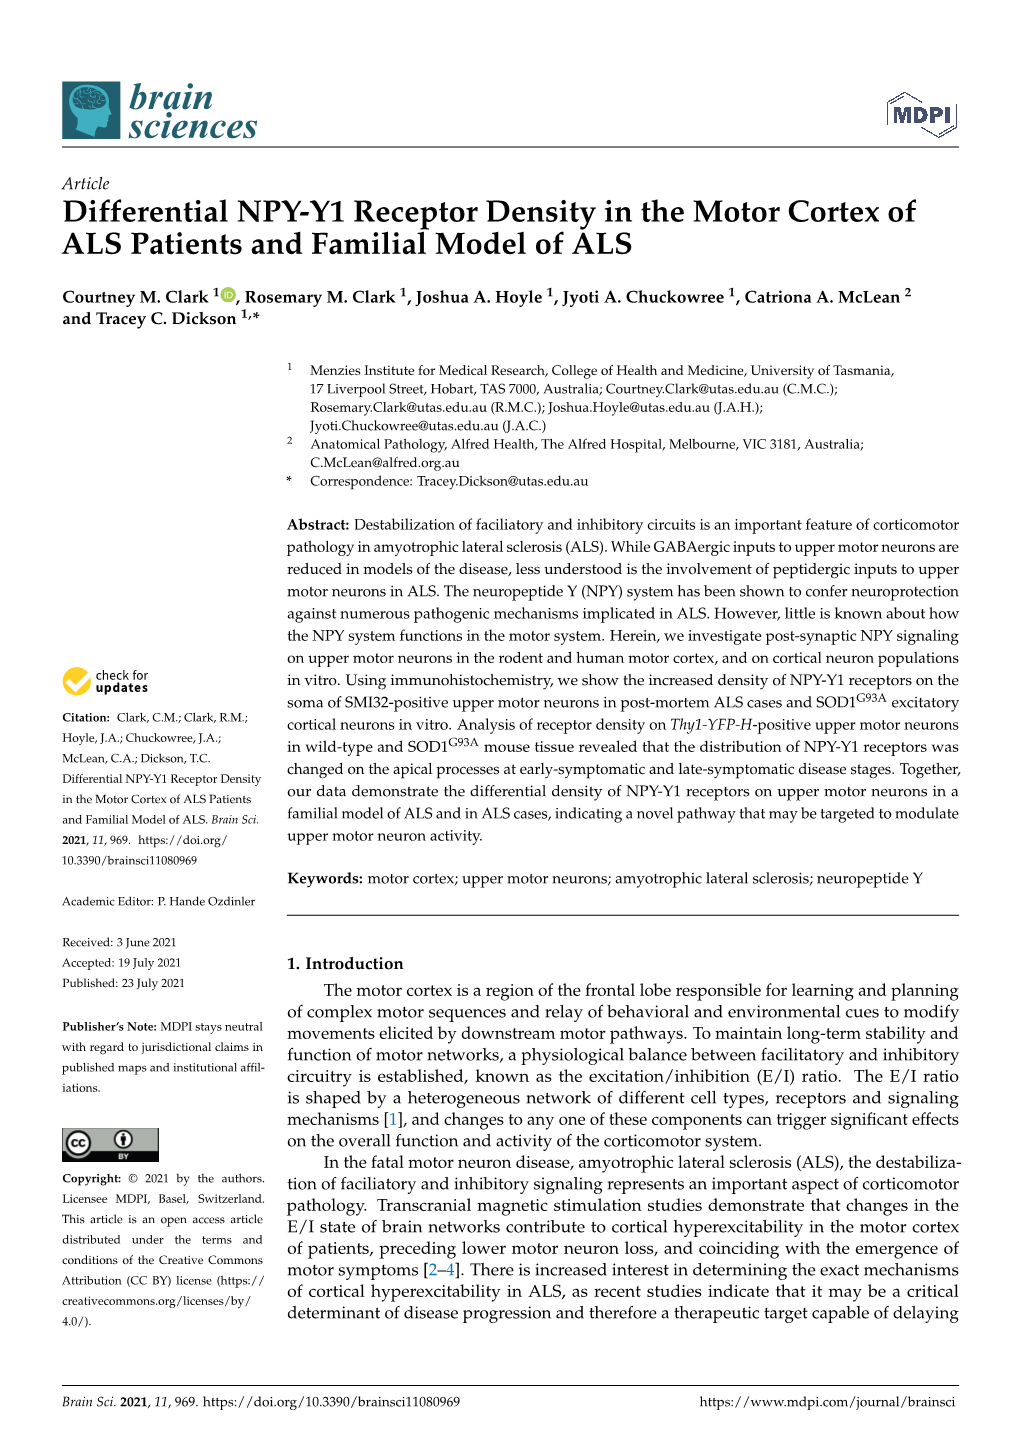 Differential NPY-Y1 Receptor Density in the Motor Cortex of ALS Patients and Familial Model of ALS